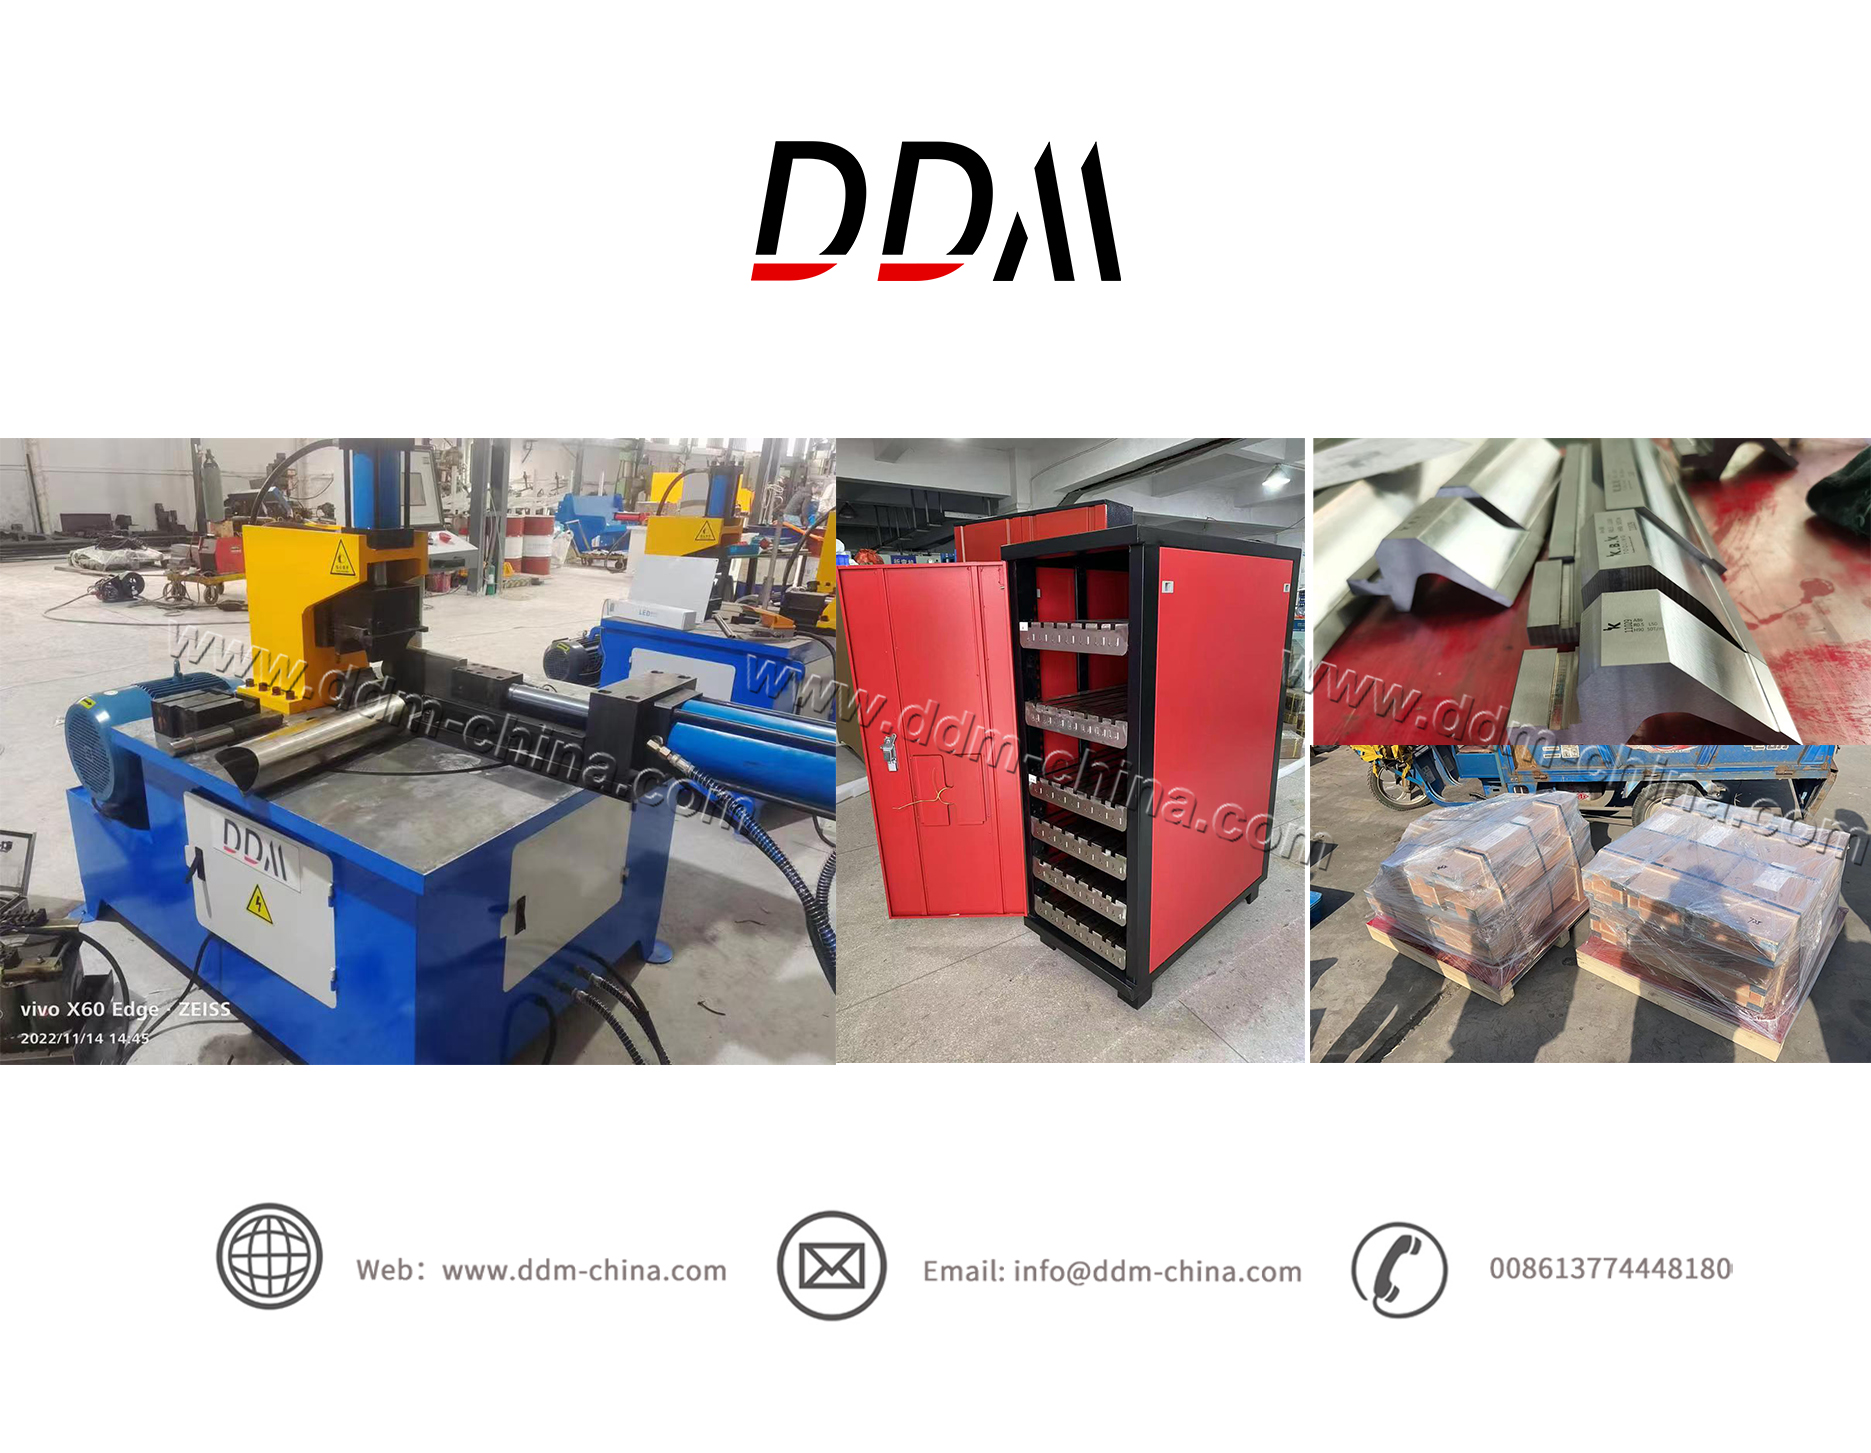 DDMPRSES -Pipe notching machine ,tool cabinet ,customzied punch and die 